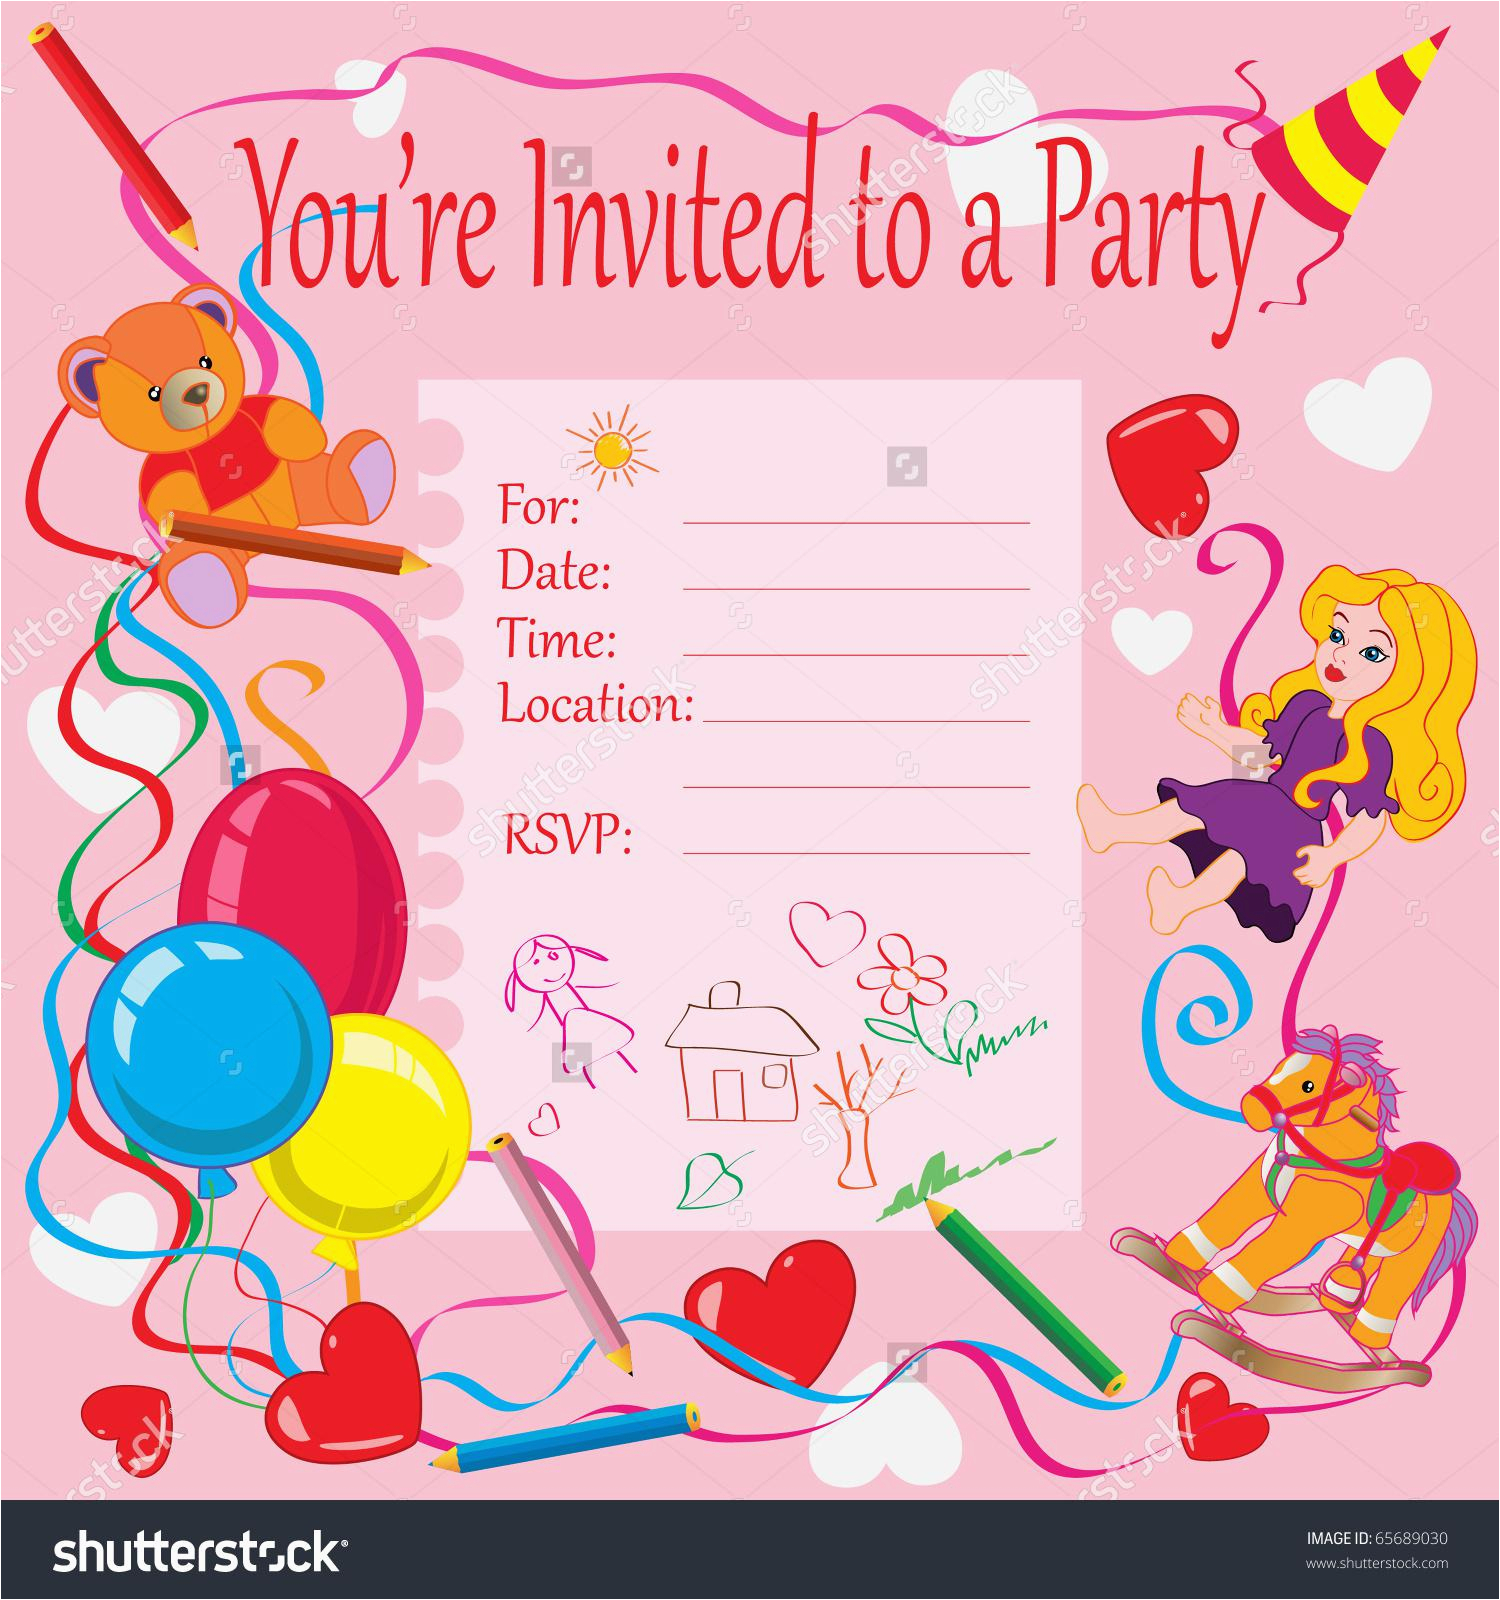 Invitations Cards for Birthday Parties 20 Birthday Invitations Cards Sample Wording Printable